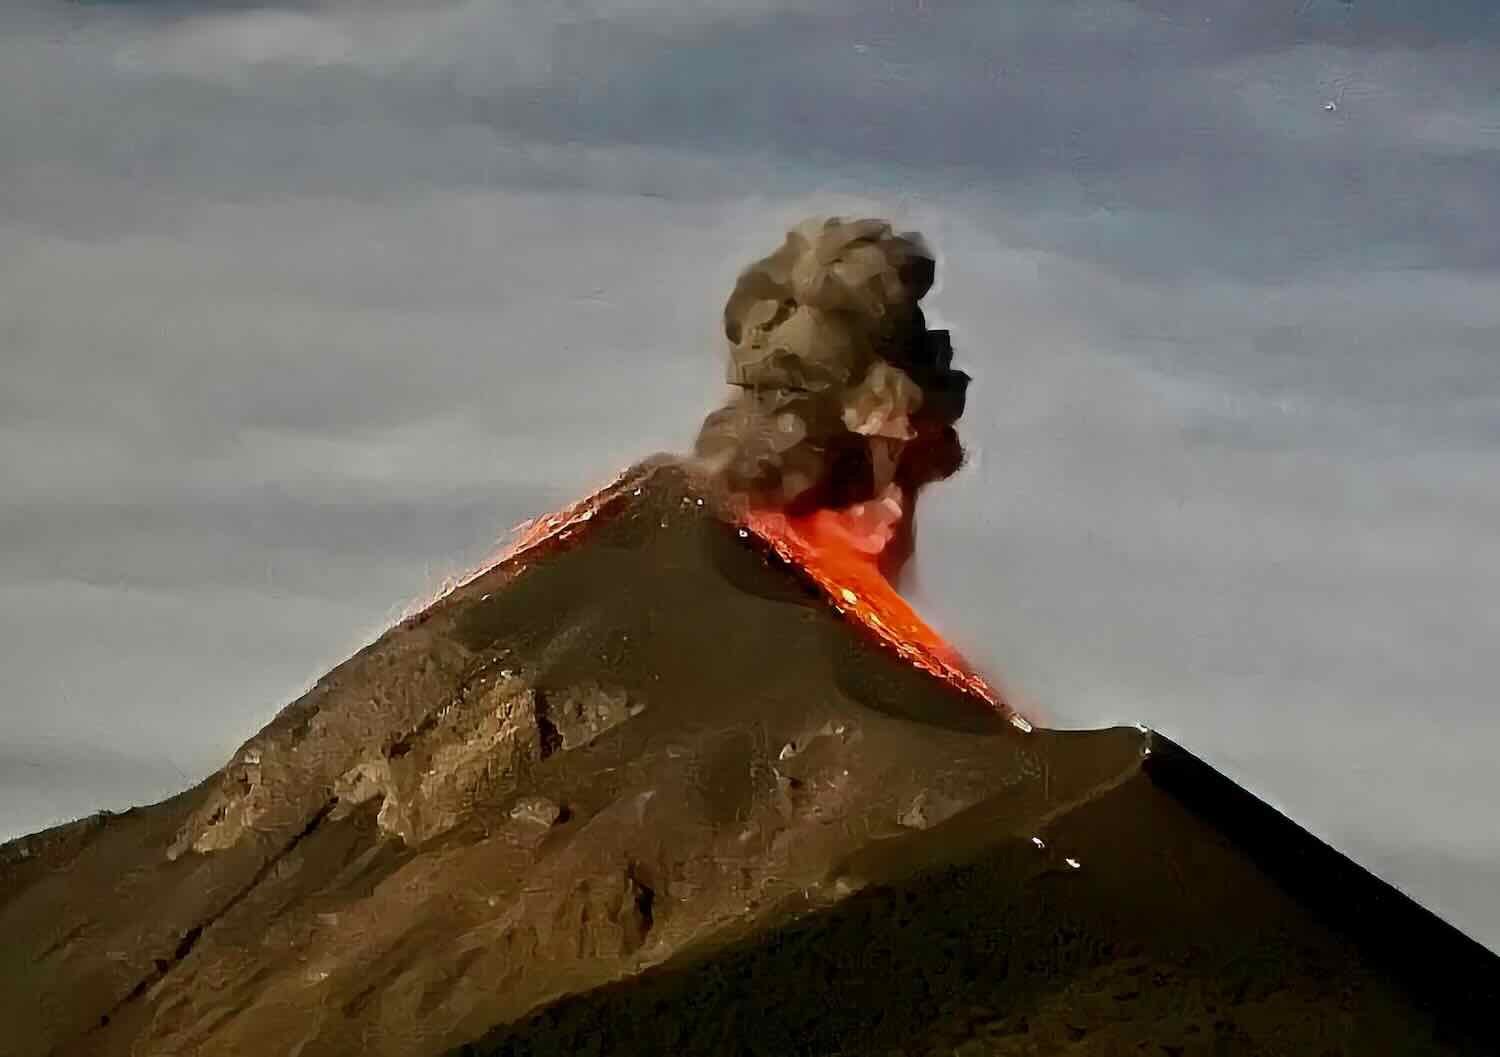 Hot lava flows down the slope of the Fuego Volcano